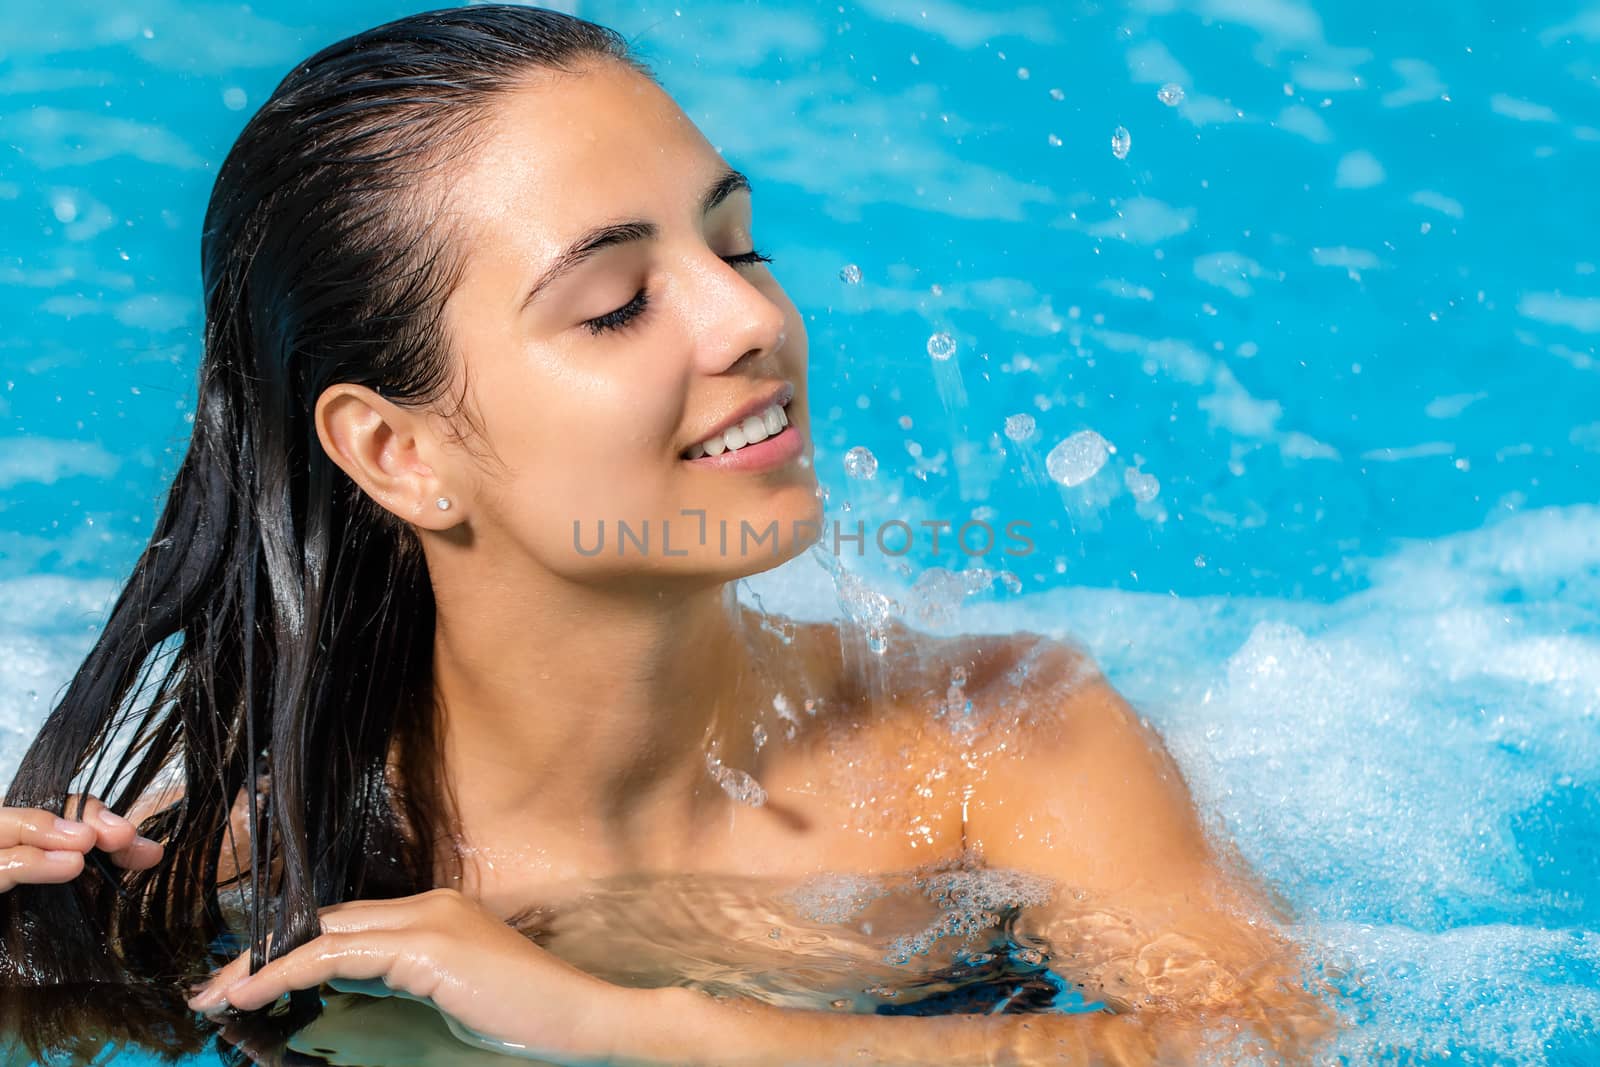 Close up portrait of attractive brunette relaxing in spa jacuzzi. Woman with relaxed face expression touching hair.